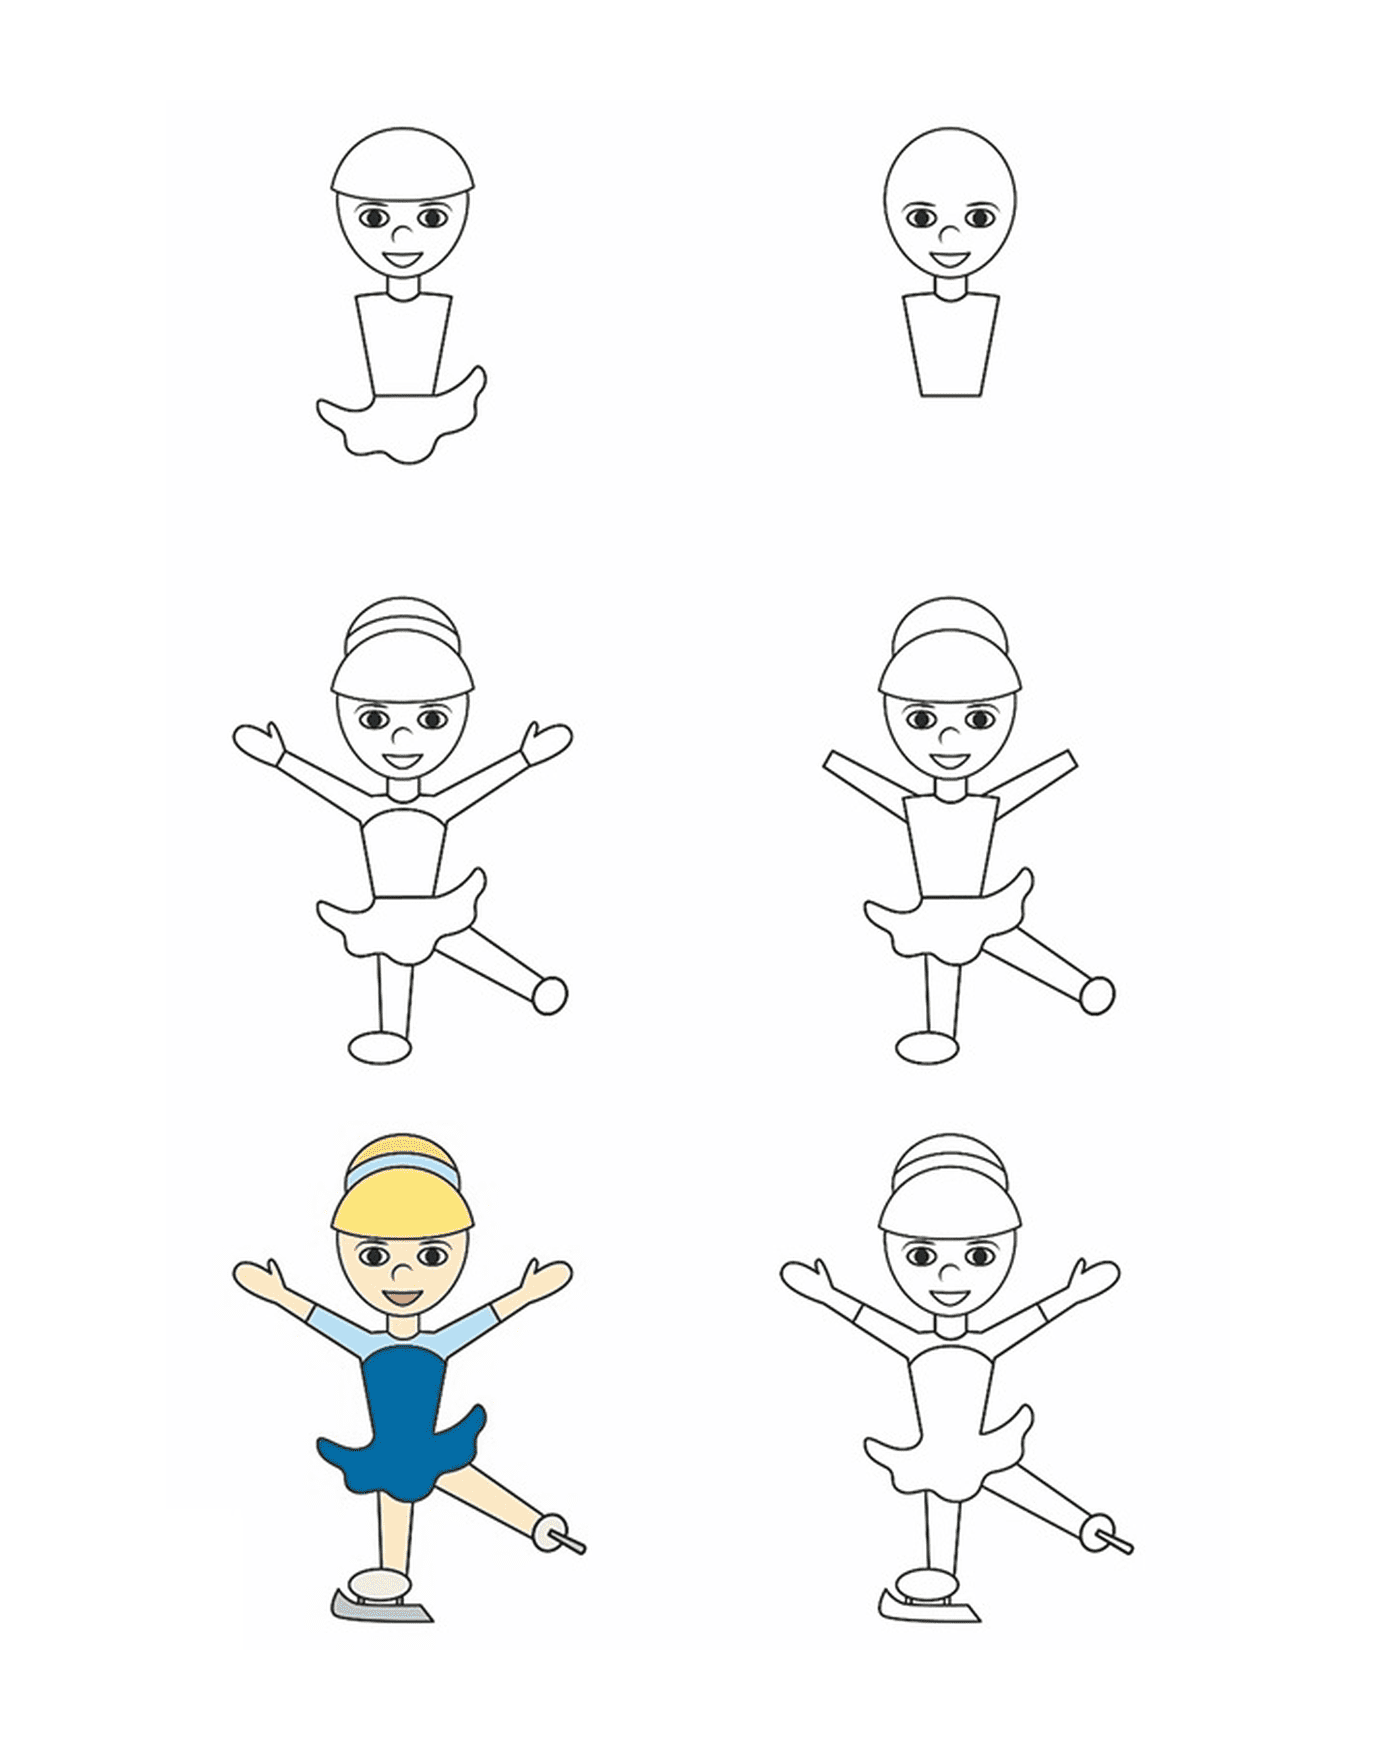  How to draw the ice skate 